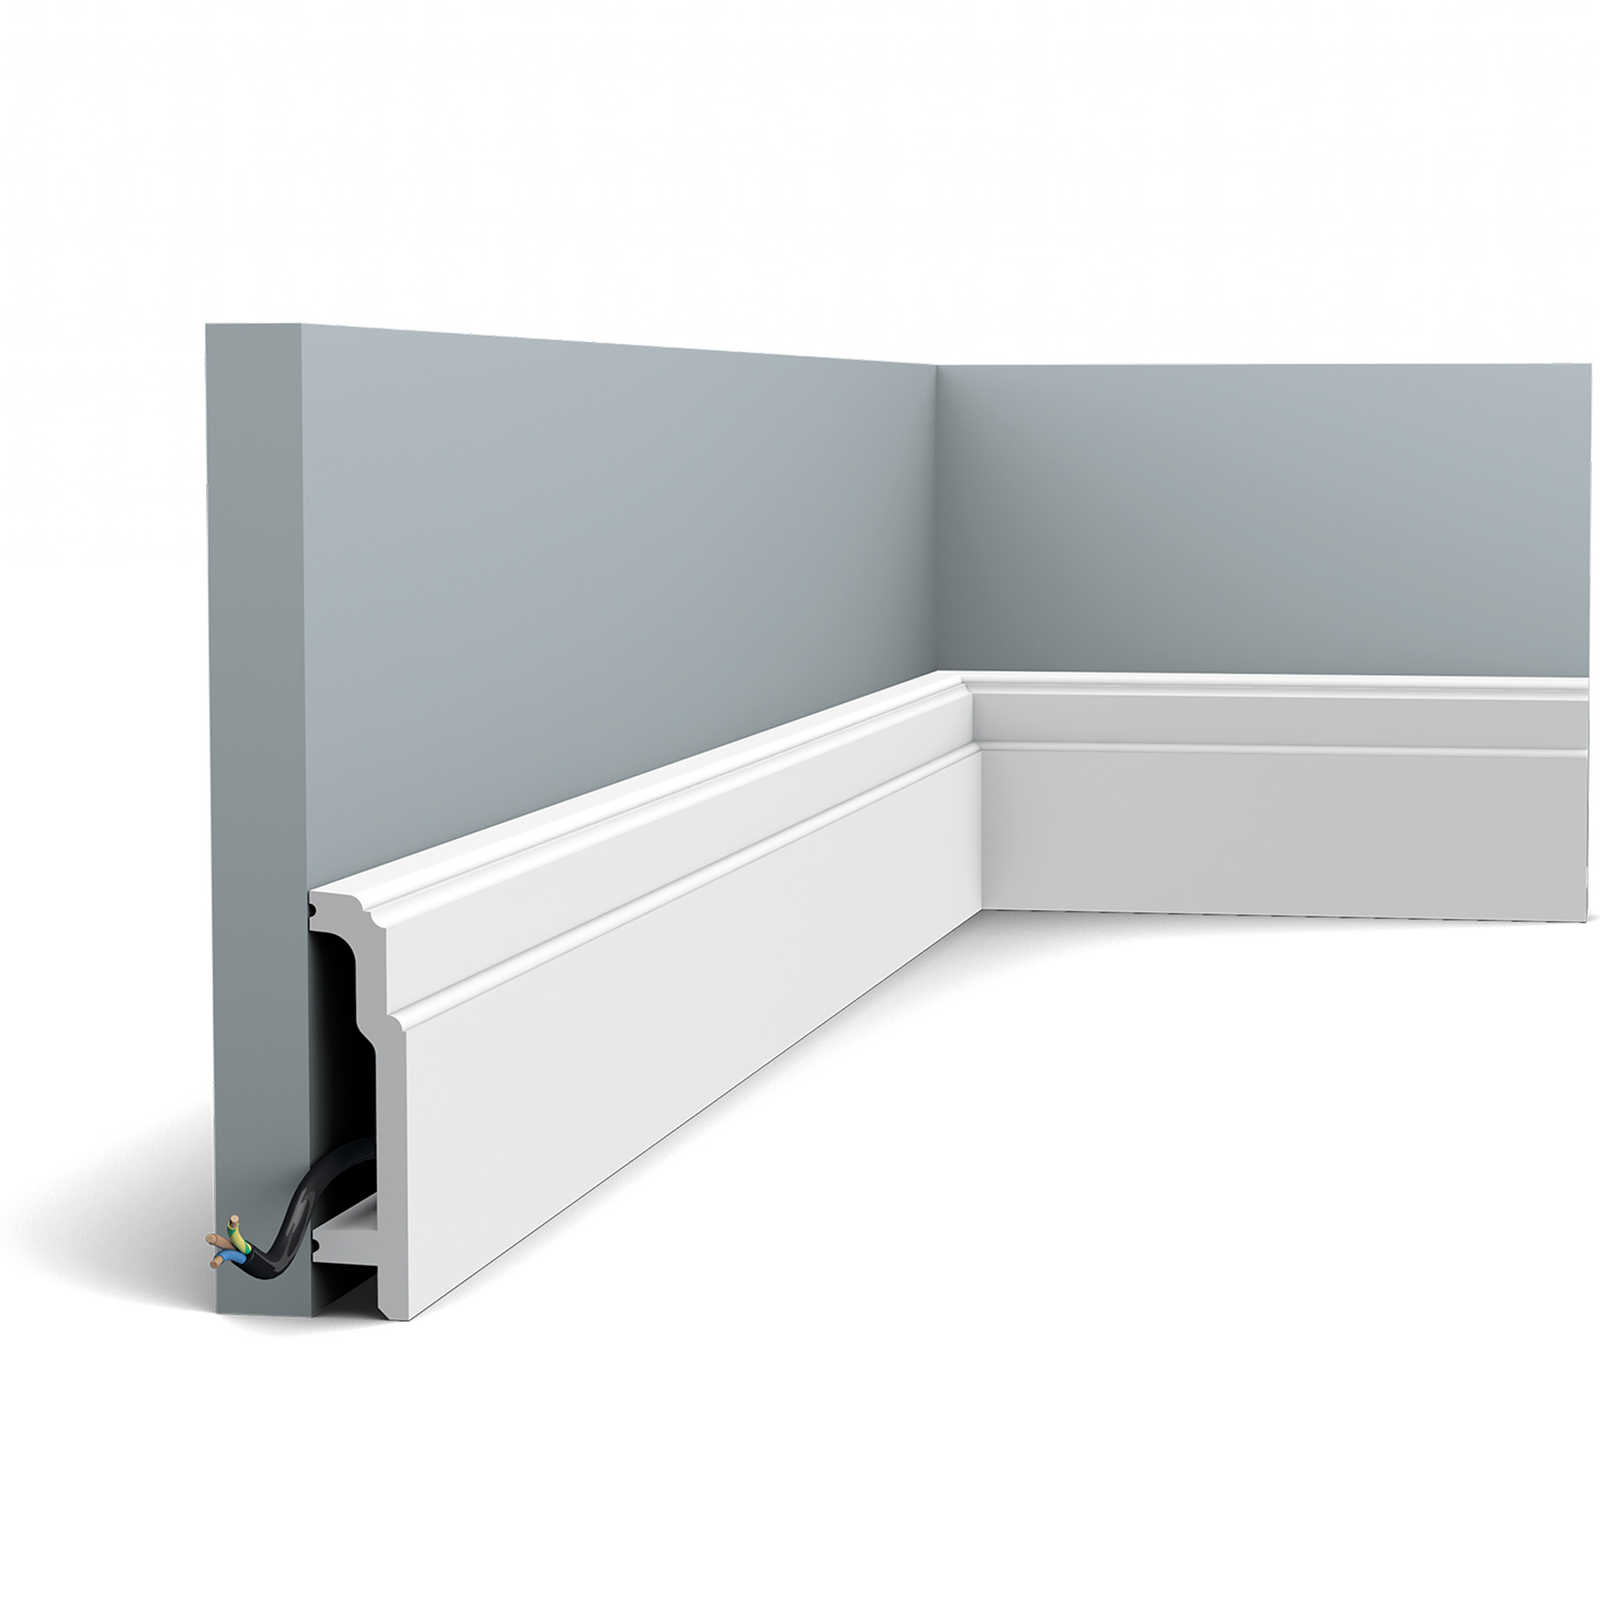 Modern skirting board Buenos Aires - SX155
